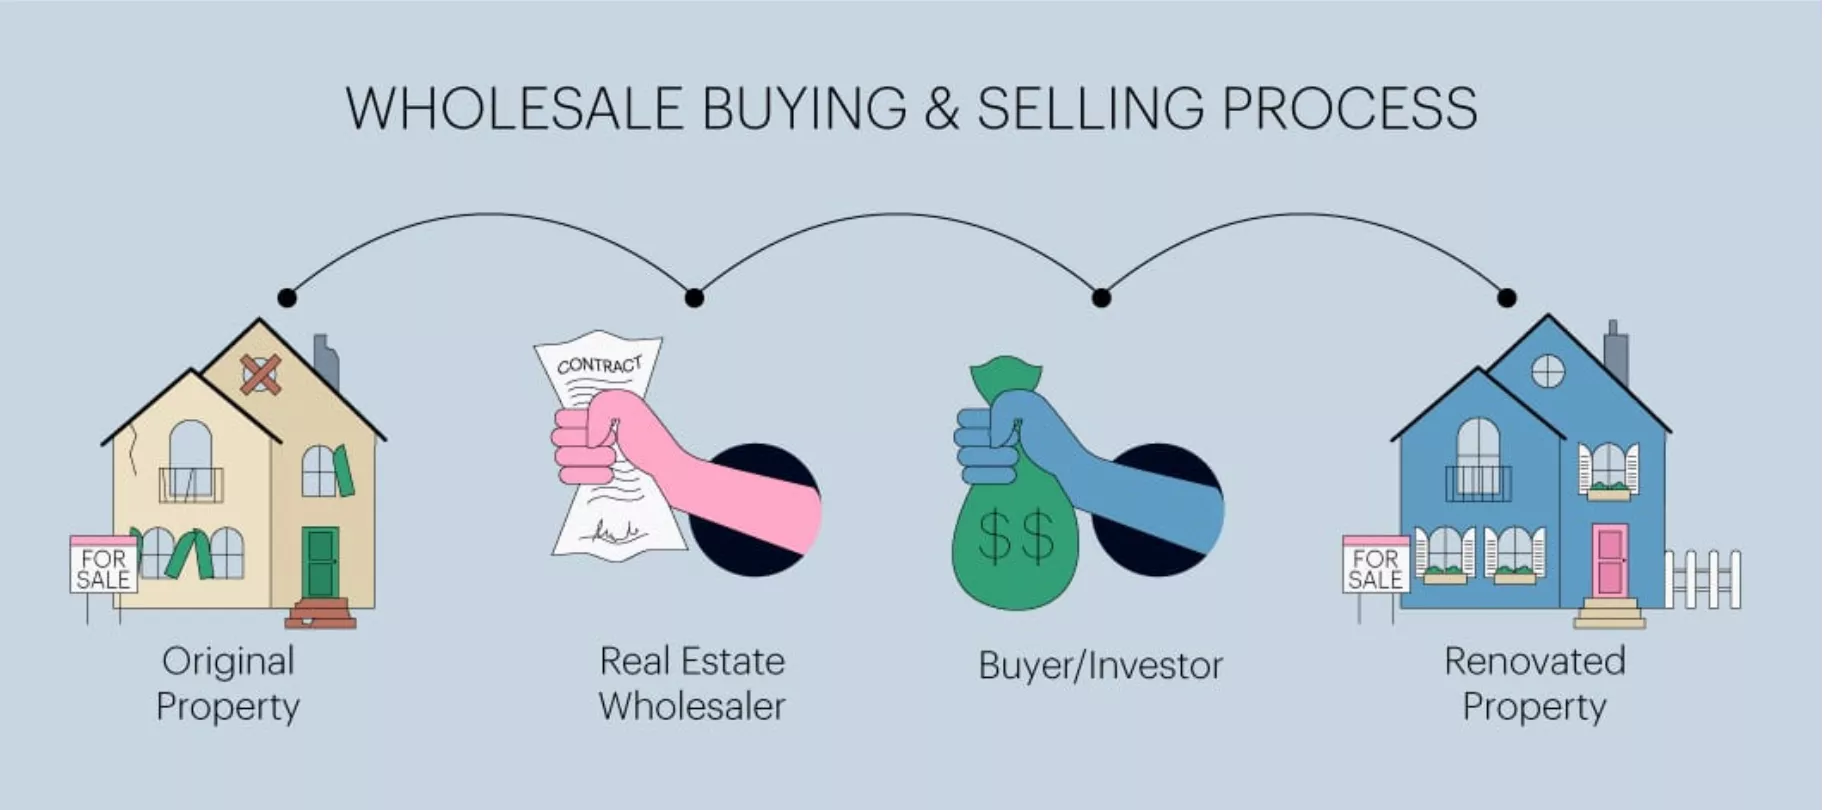 sell wholesale deals to real estate agents